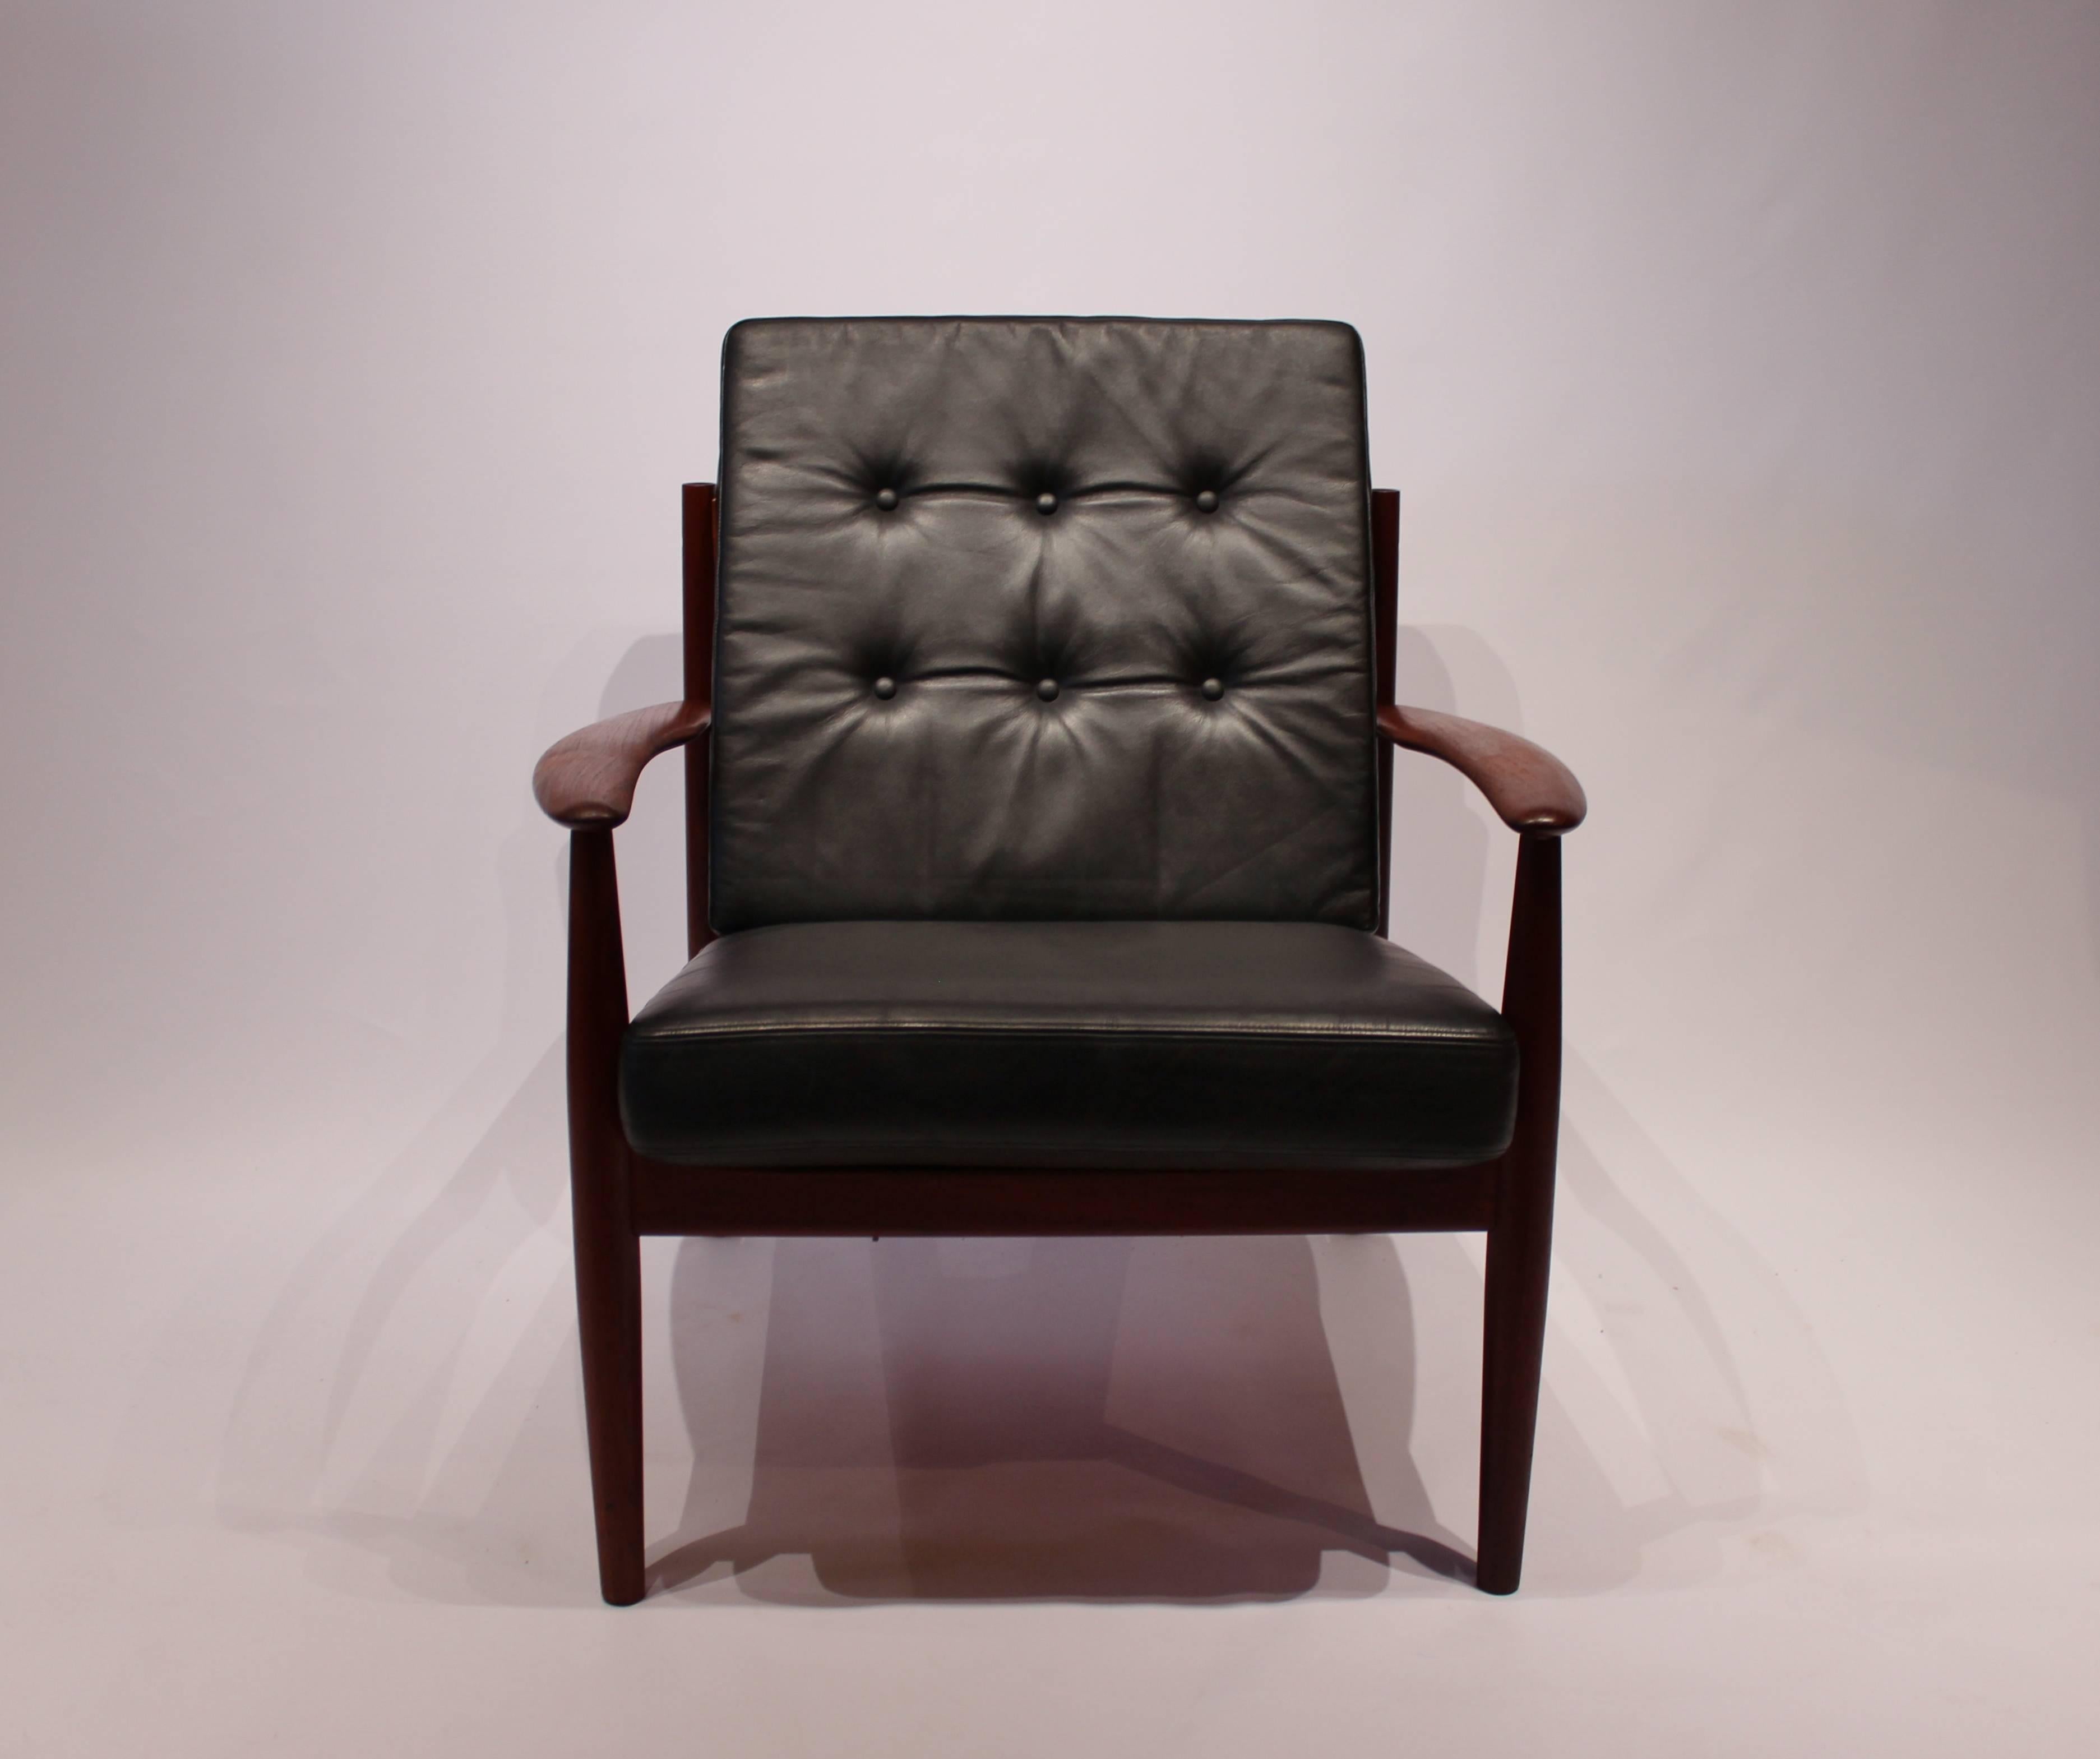 Easy chair, model 118, in teak and black elegance leather designed by Grete Jalk and manufactured by France & Son in the 1960s. The chair is in great vintage condition and of classic timeless Danish Design.

This product will be inspected thoroughly